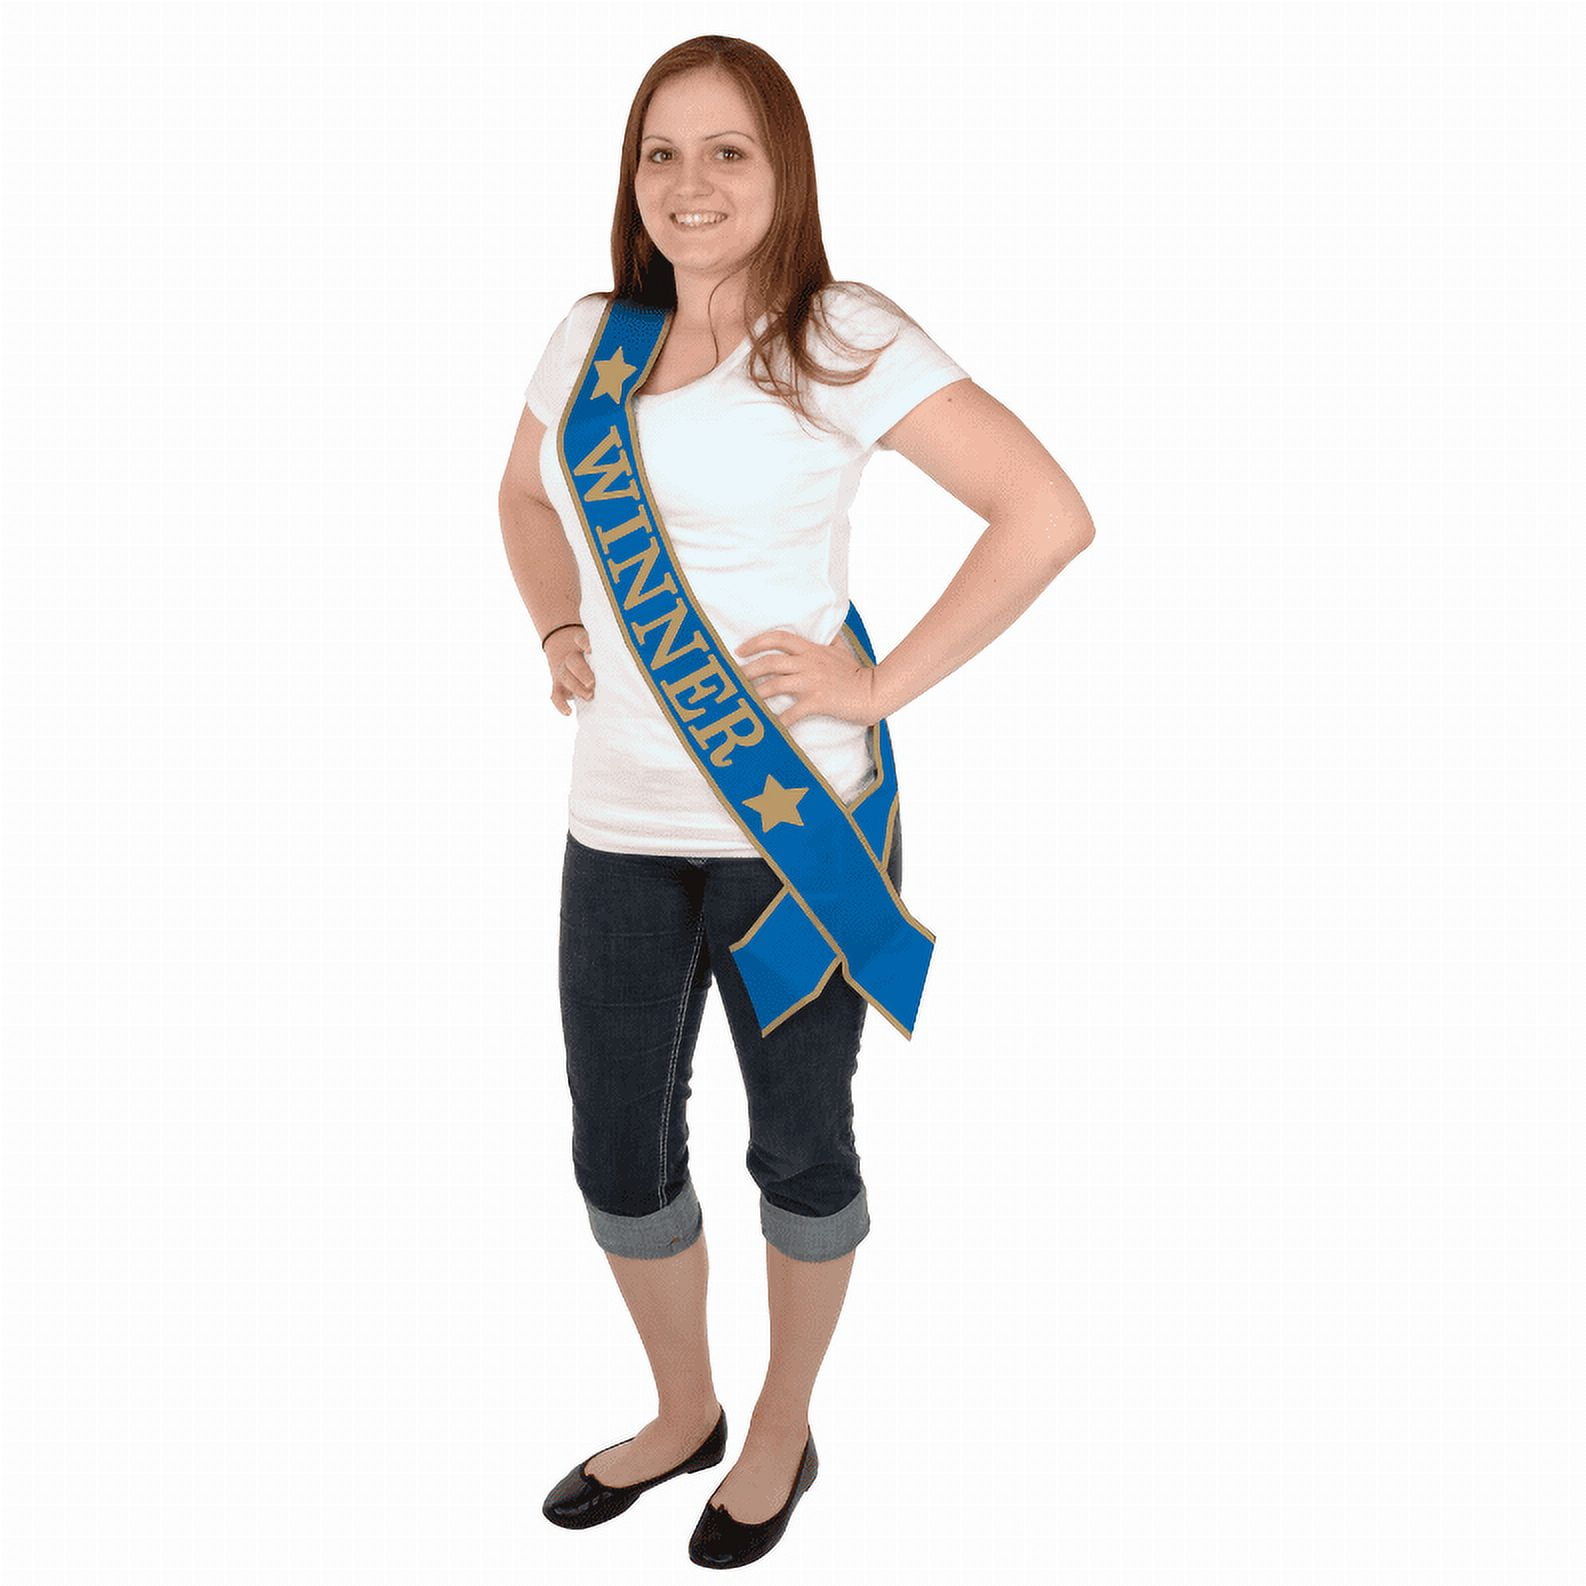 Sashes (Multiple Designs Available)